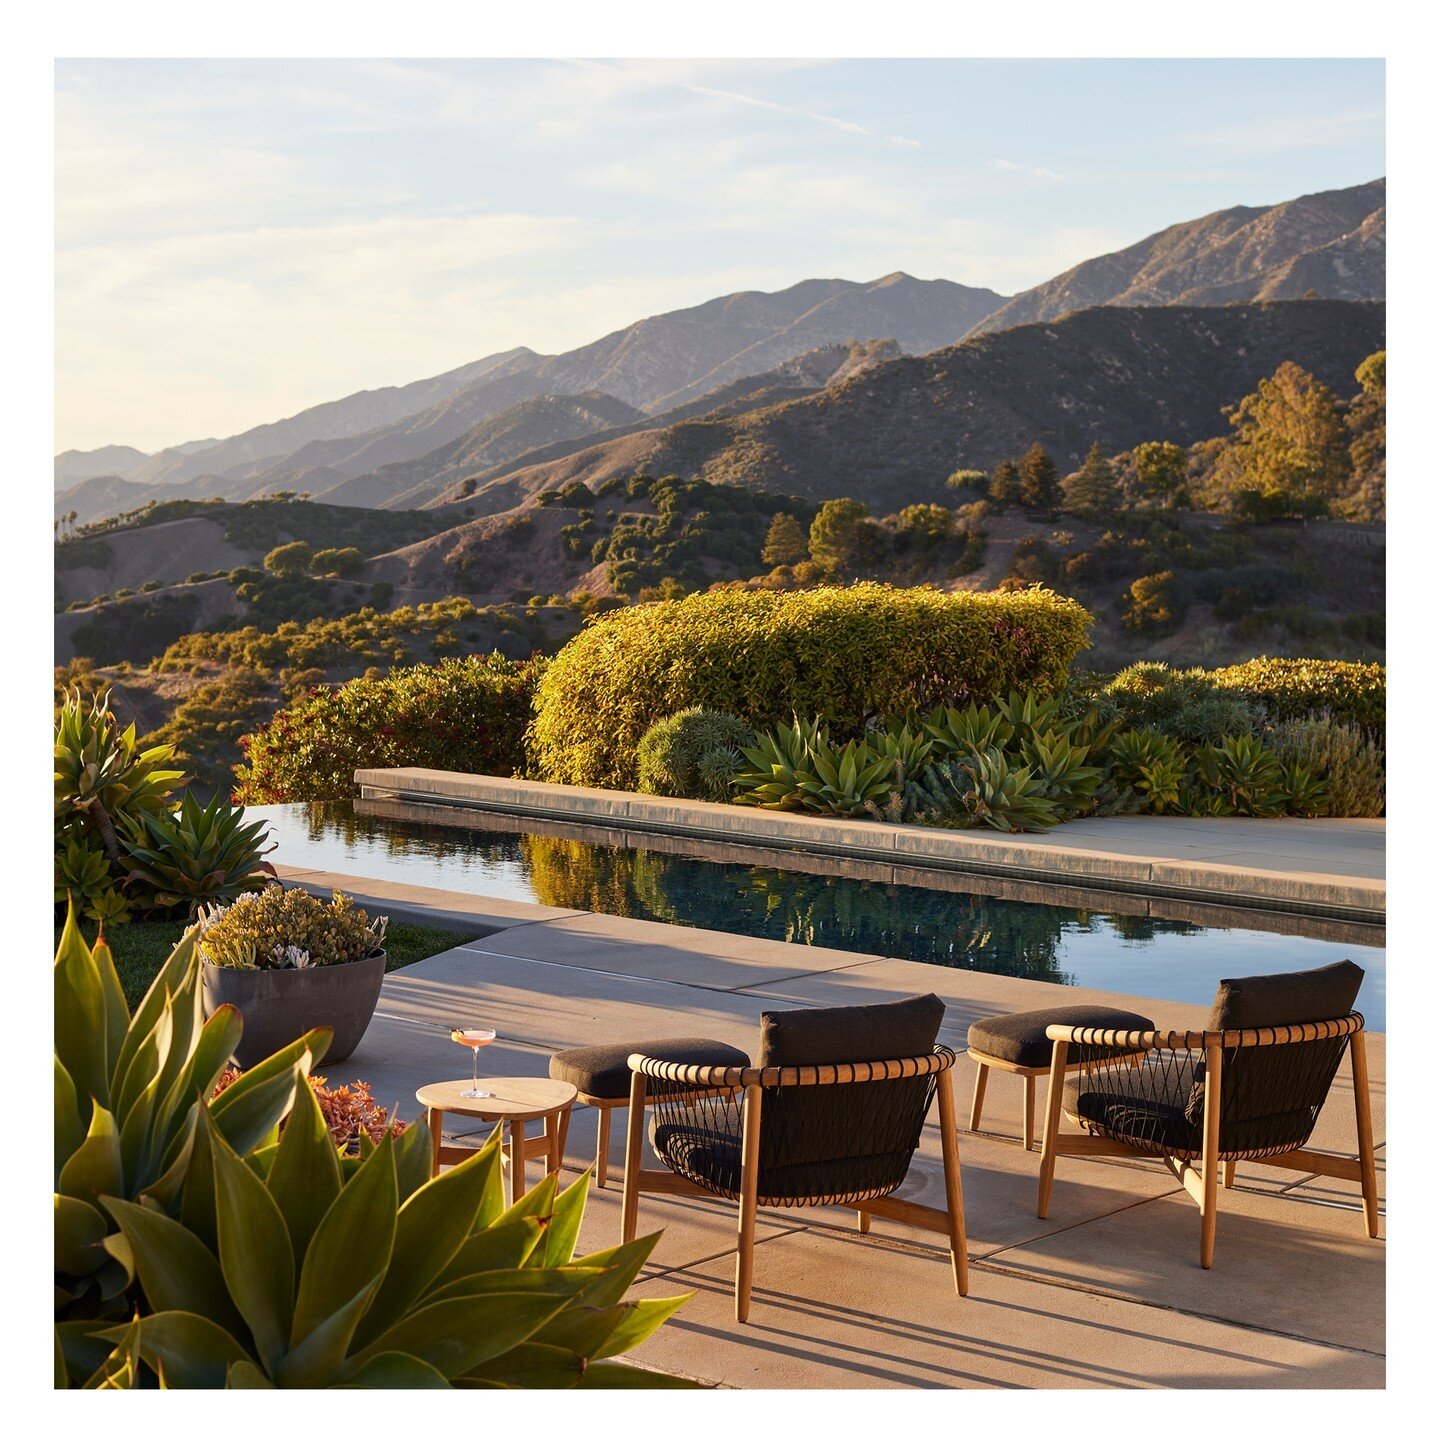 Wishing we could transport to these fabulous settings and celebrate Cinco de Mayo in style 🌵😎🍹 Cheers to great outdoor living and the festive spirit of the day! 

. . . 

#cincodemayo #fiesta #hermanmiller #knoll #millerknoll #millerknolldealer #t